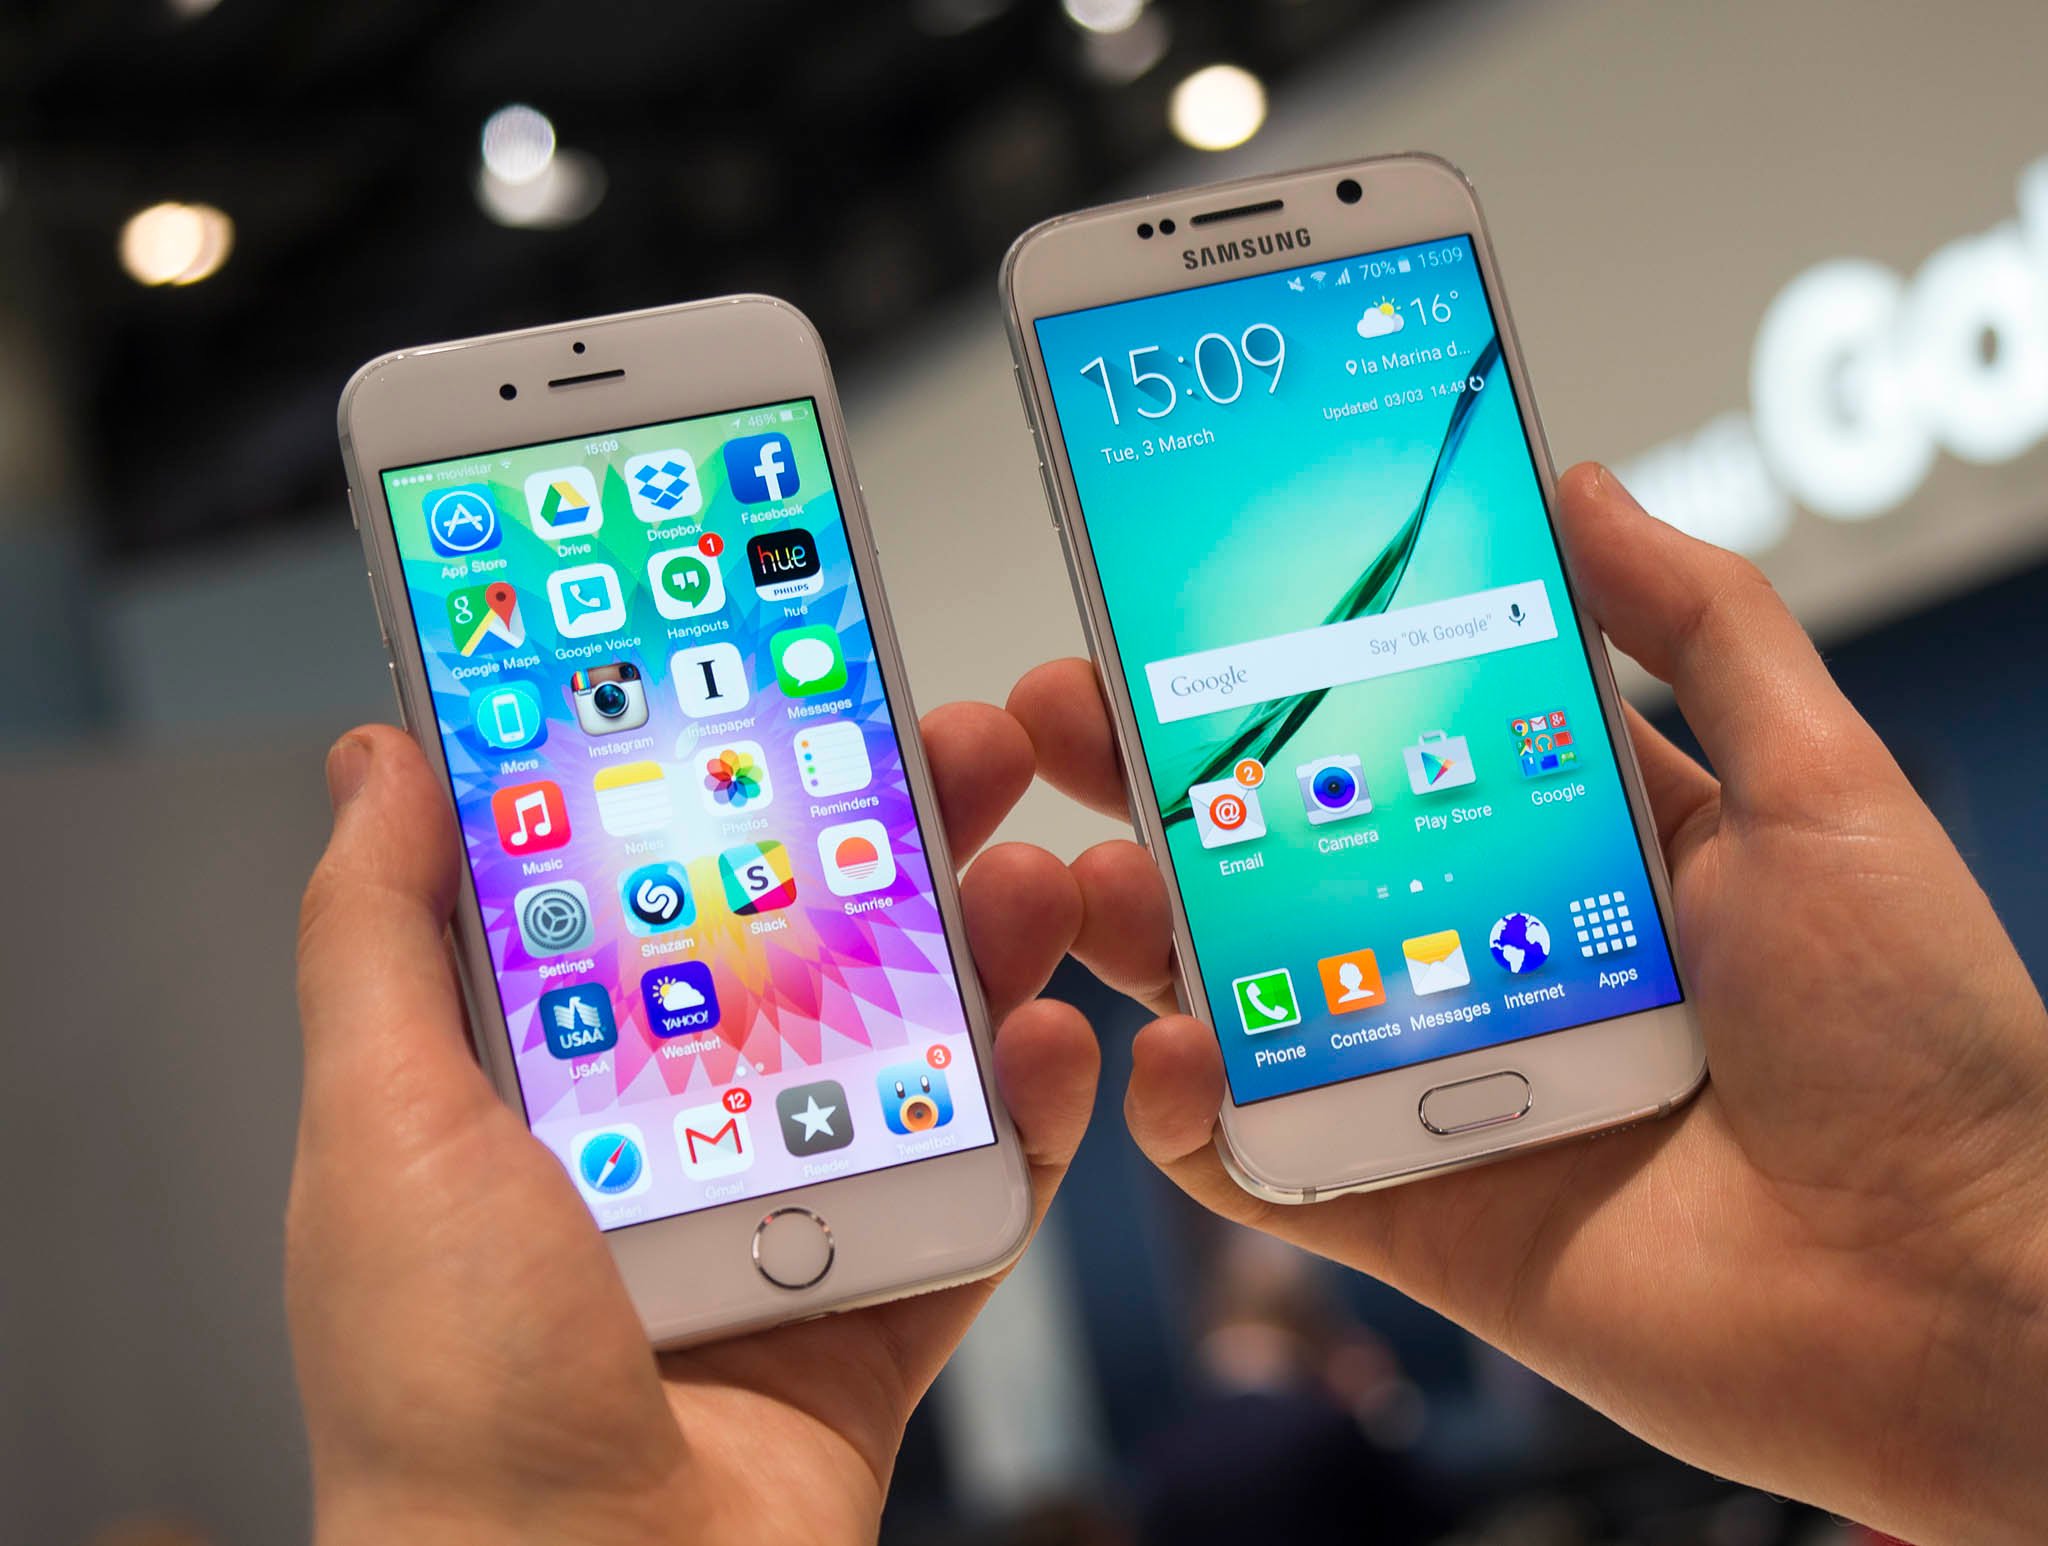 galaxy-s6-iphone-6-comparison-fronts-hands.jpg